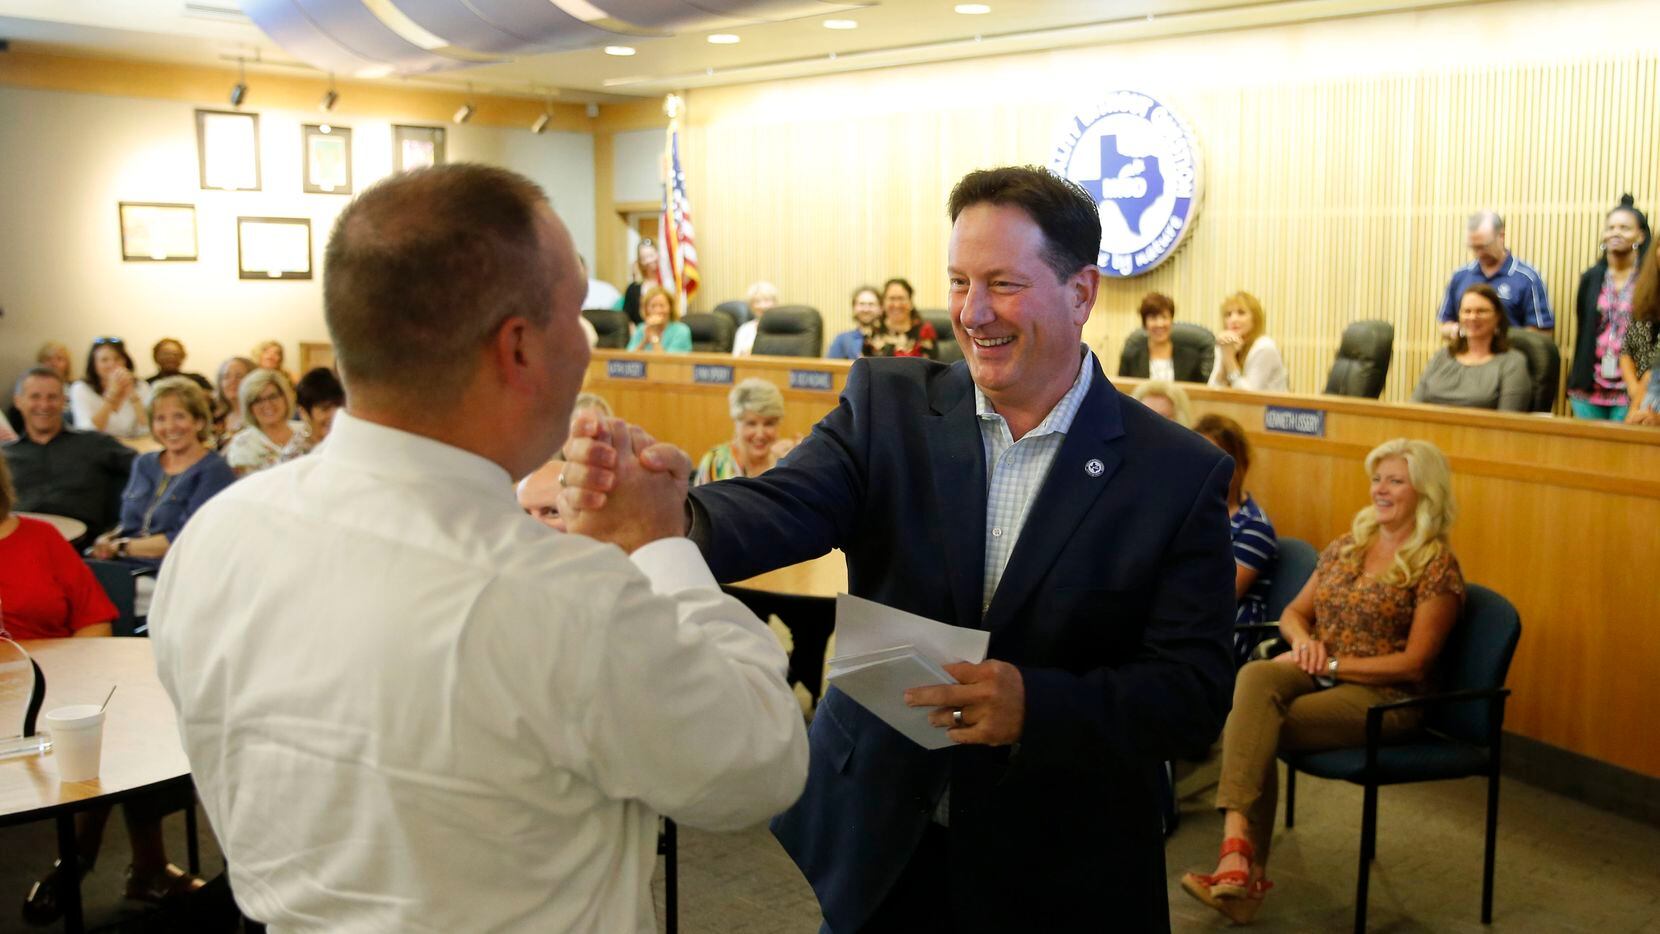 McKinney Independent School District superintendent Dr. Rick McDaniel (right) celebrated with Geoff Sanderson (left) after calling his name to celebrate his birthday other co-workers born in the month of September during a meeting at the McKinney ISD Administration Building in Dallas in 2018.